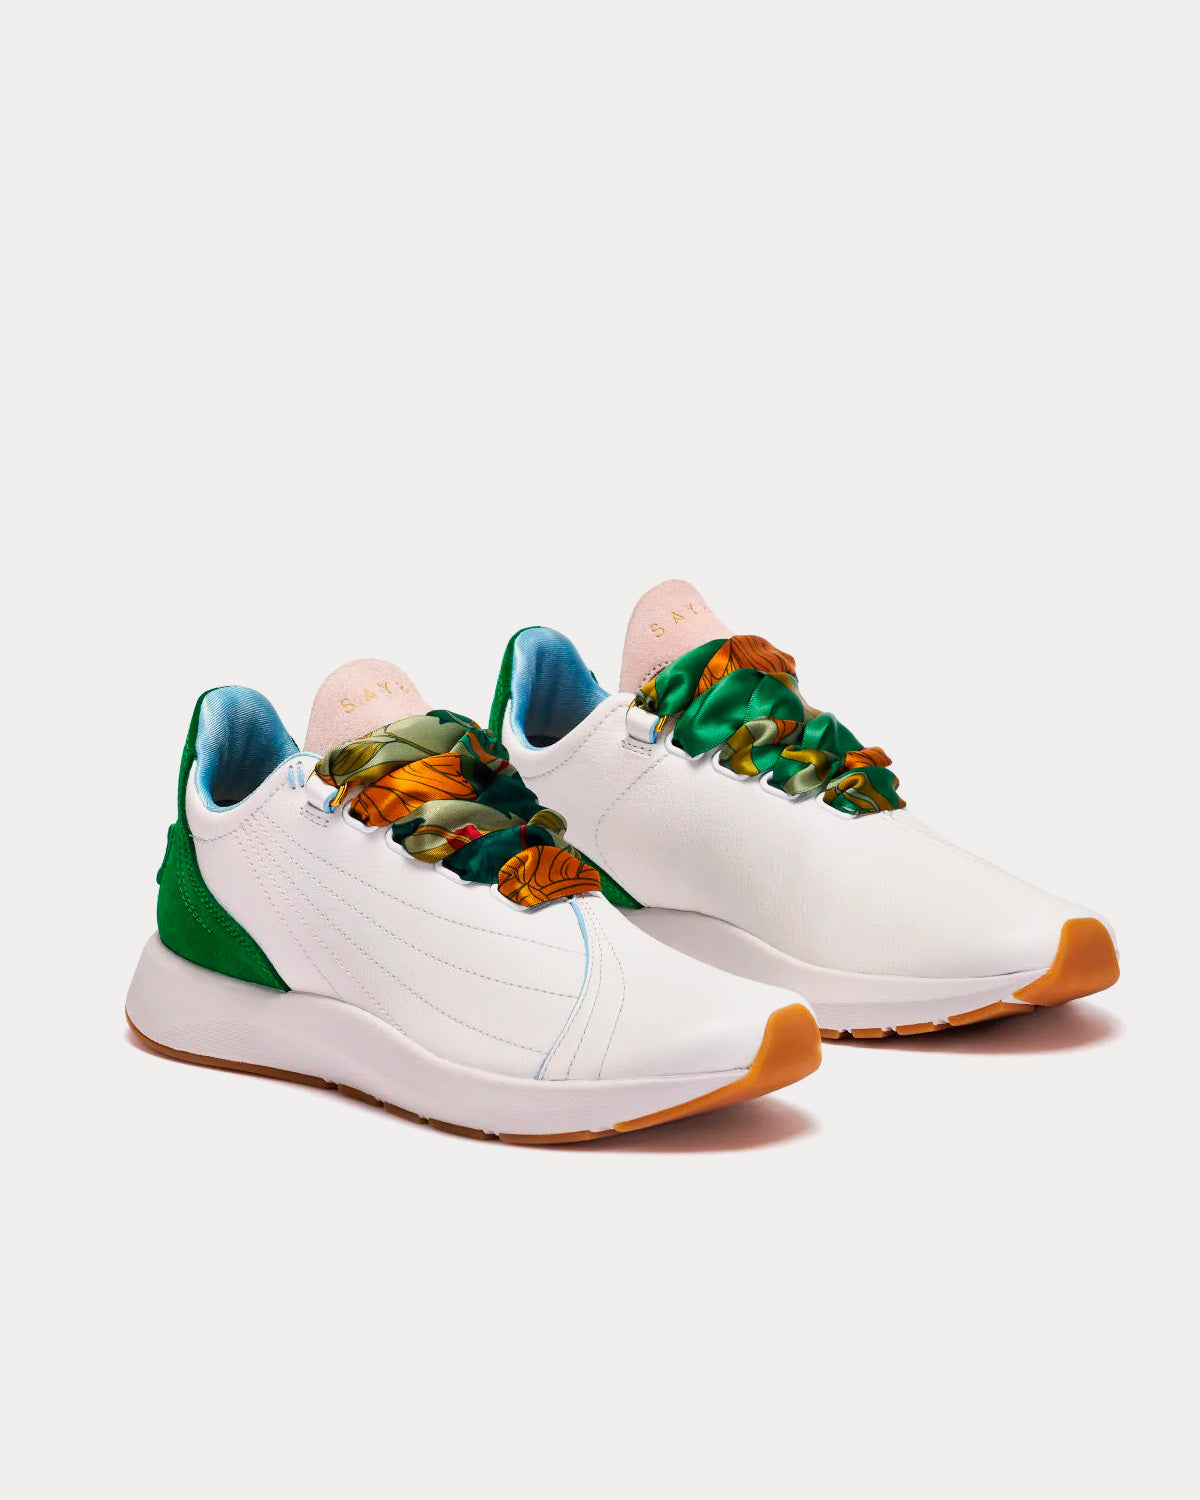 Saysh - Two White / Green Low Top Sneakers